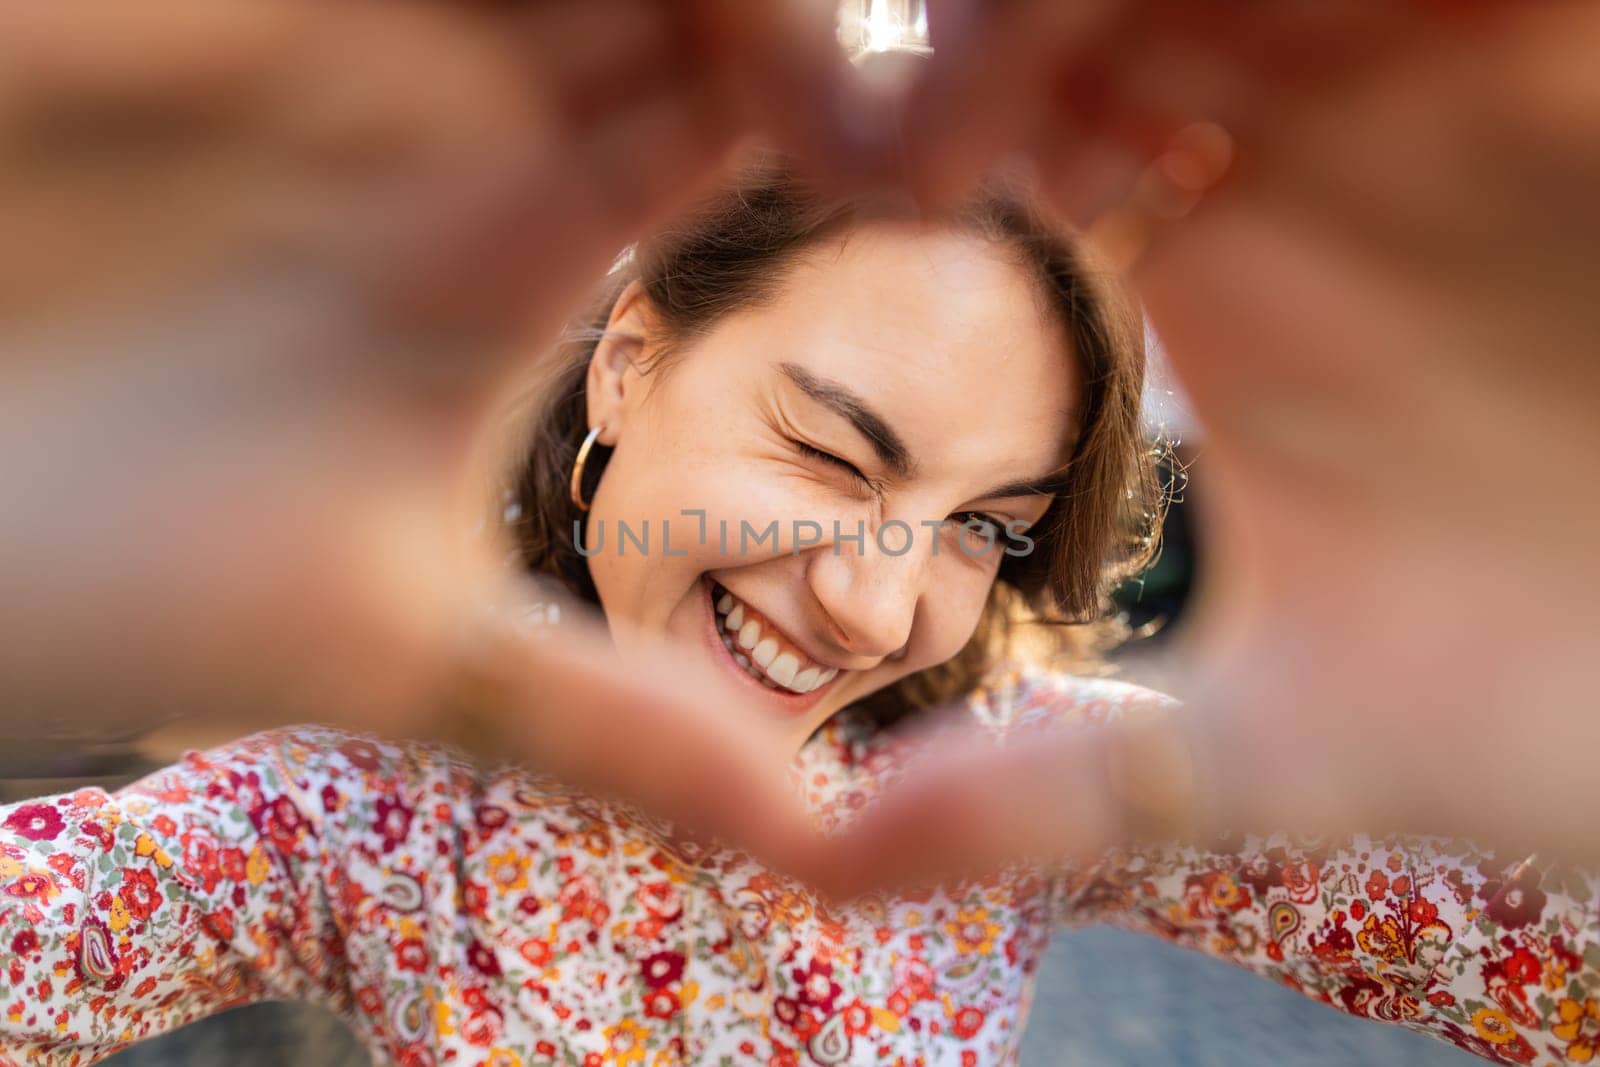 I love you. Portrait of Caucasian woman makes symbol of love, showing heart sign to camera, express romantic feelings, express sincere positive feelings. Charity, donation. Outdoors in city street